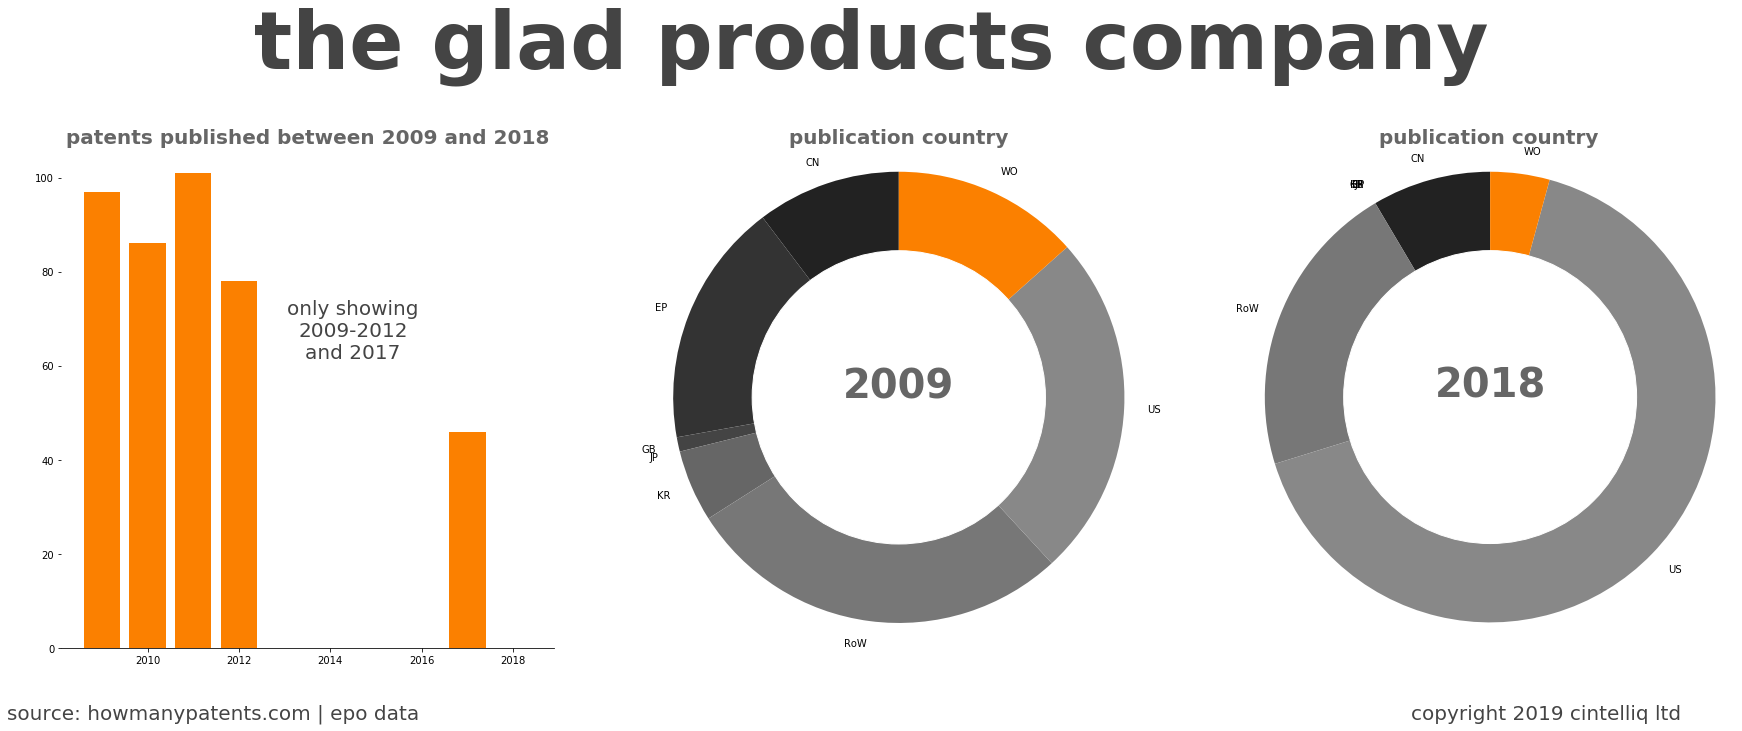 summary of patents for The Glad Products Company